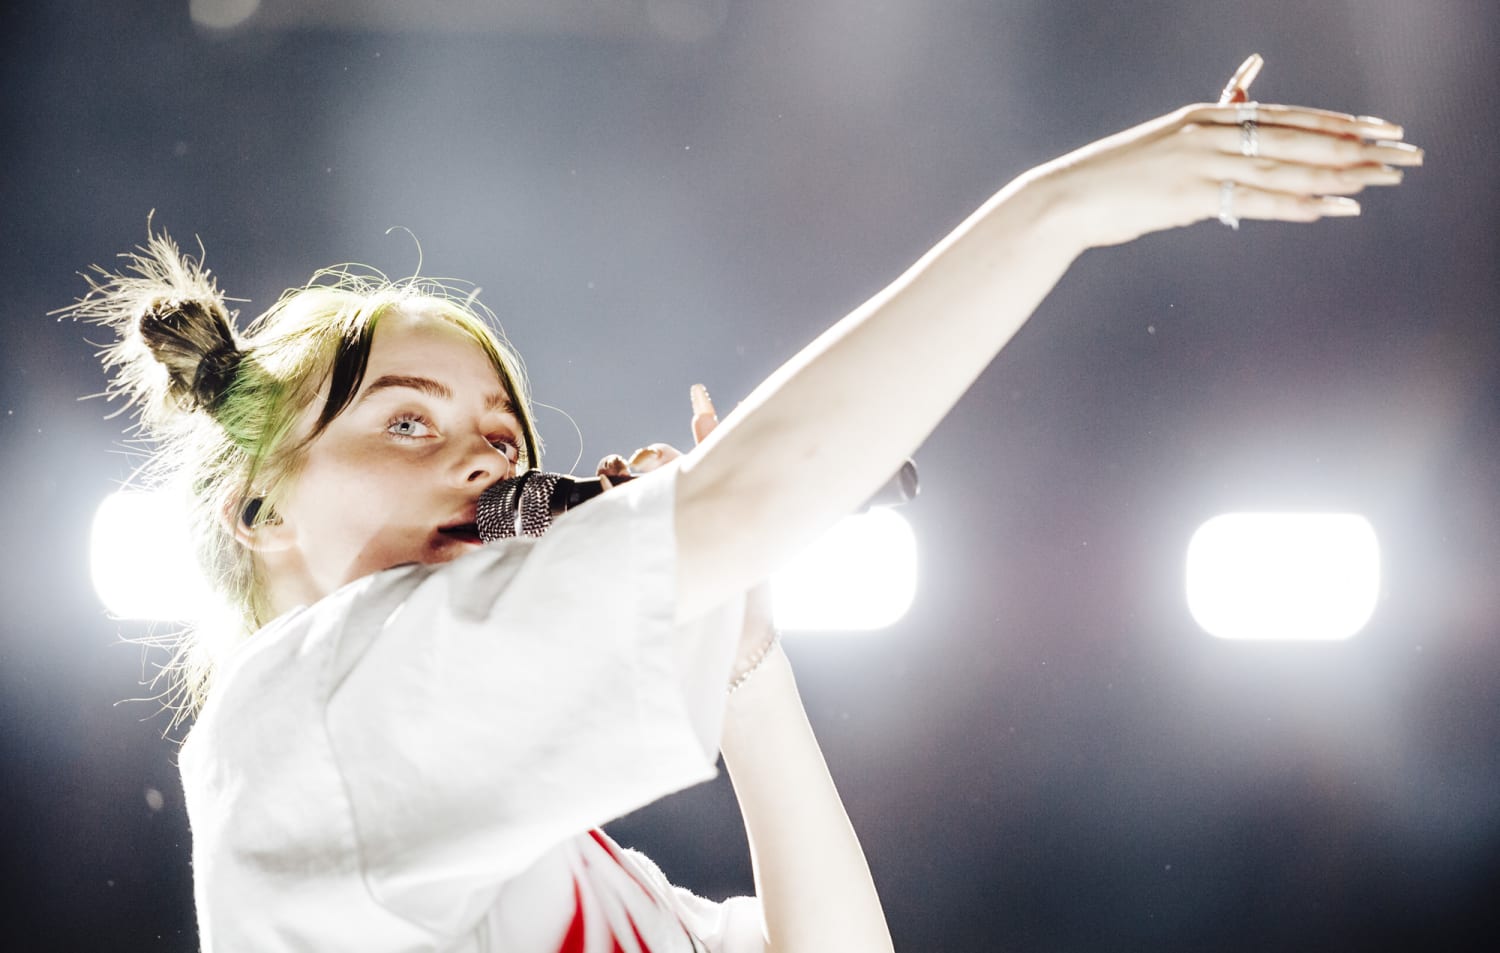 Billie Eilish to donate proceeds from Atlanta festival performance to Planned Parenthood